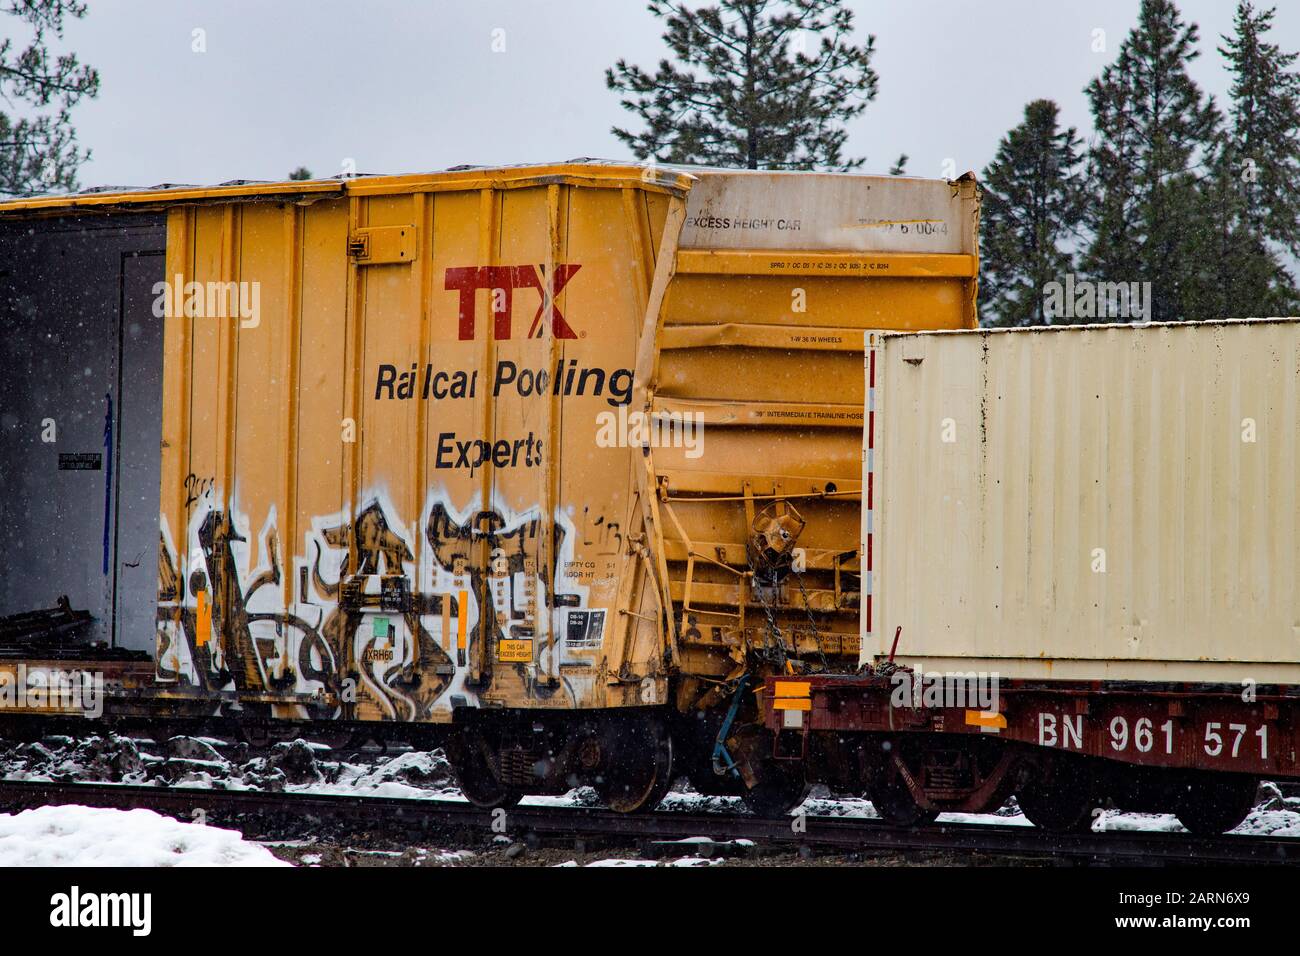 A crushed TTX Railroad box car In the BNSF train yard, in the town of Troy, Montana. Stock Photo